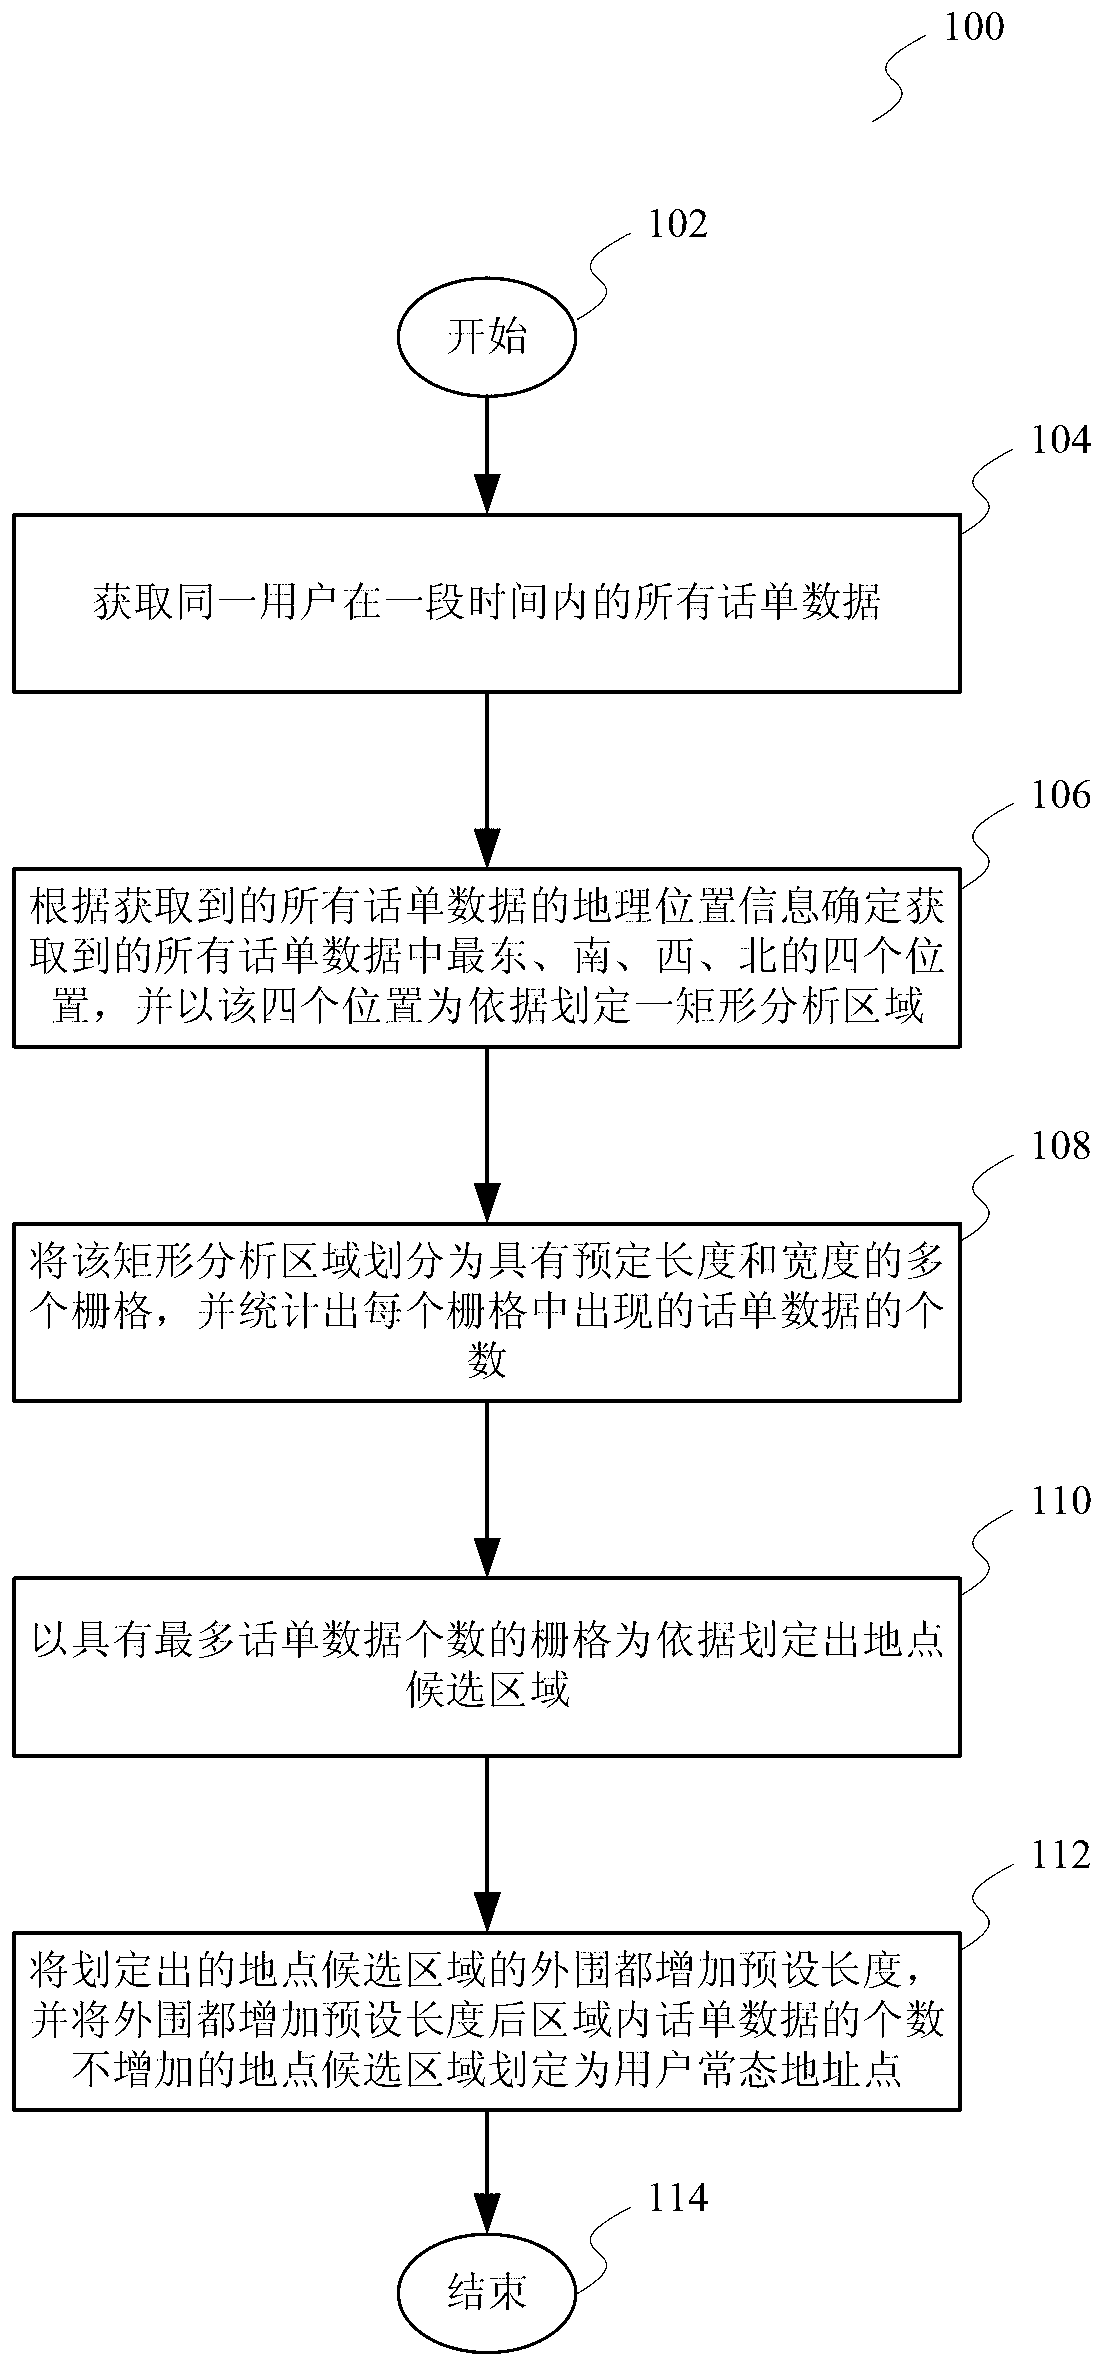 Method for determining normal-state address point of user and method for carrying out call bill data analysis based on same